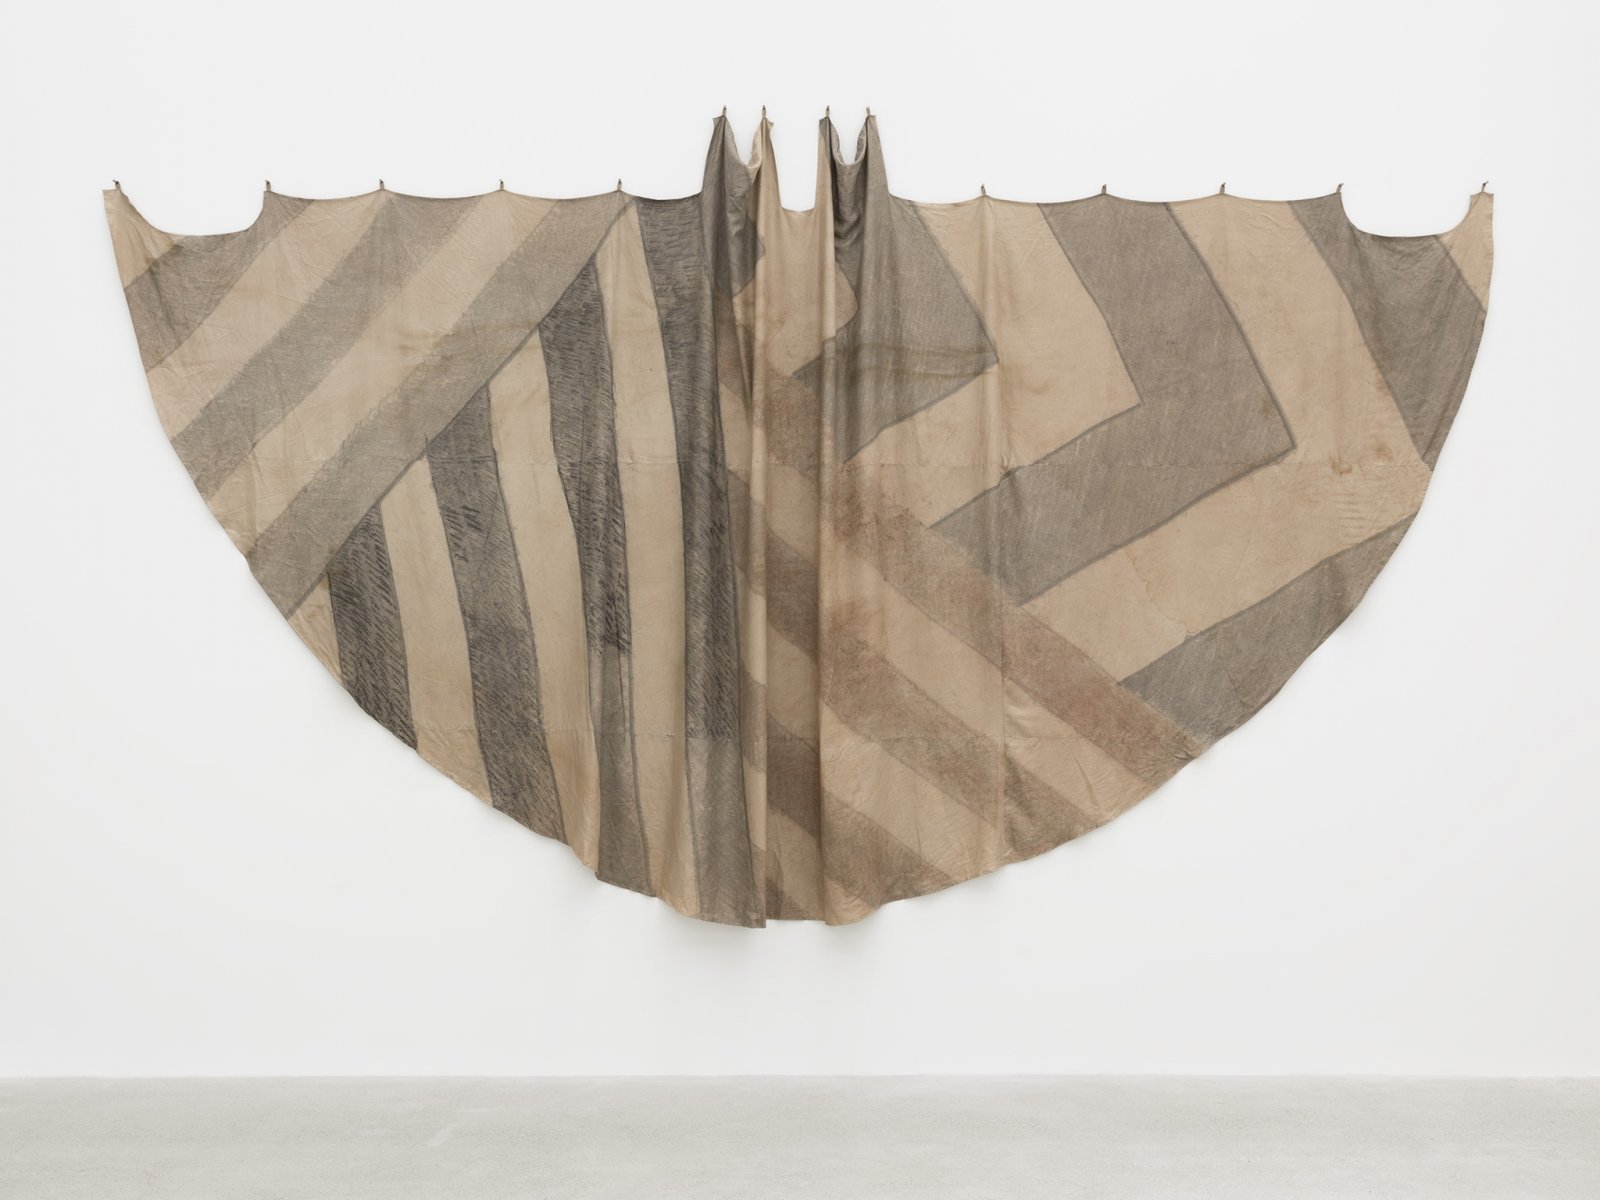 Duane Linklater, Tipi cover for deep forest dazzle / four on the floor for Tobias, 2018, digital print on hand-dyed linen, sumac, cedar, charcoal, nails, 117 x 230 in. (296 x 584 cm)